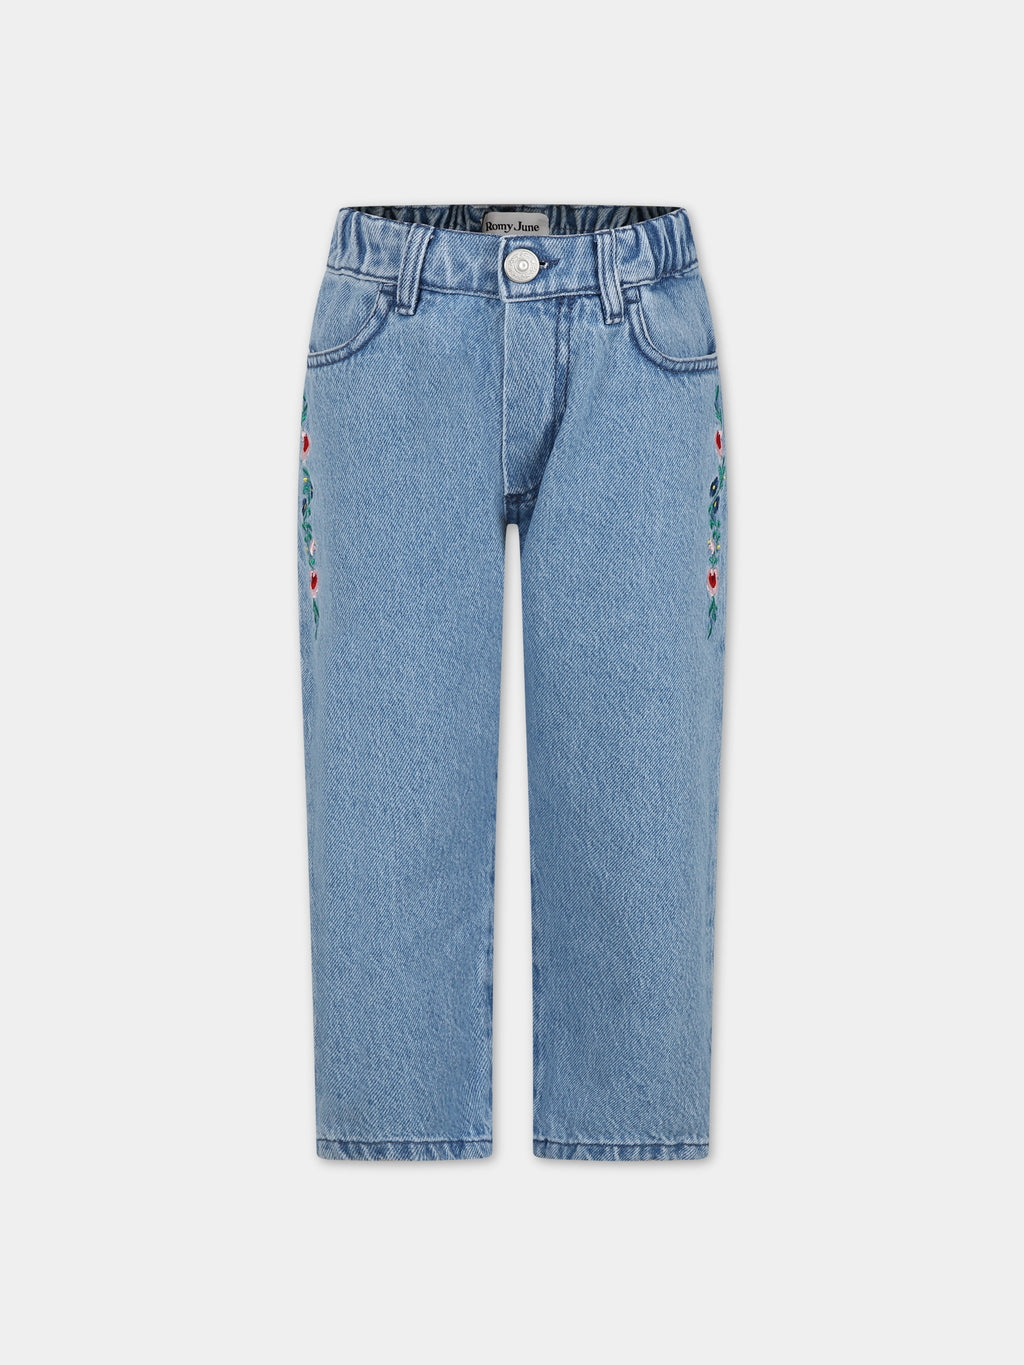 Denim jeans for girl with embroidered flowers